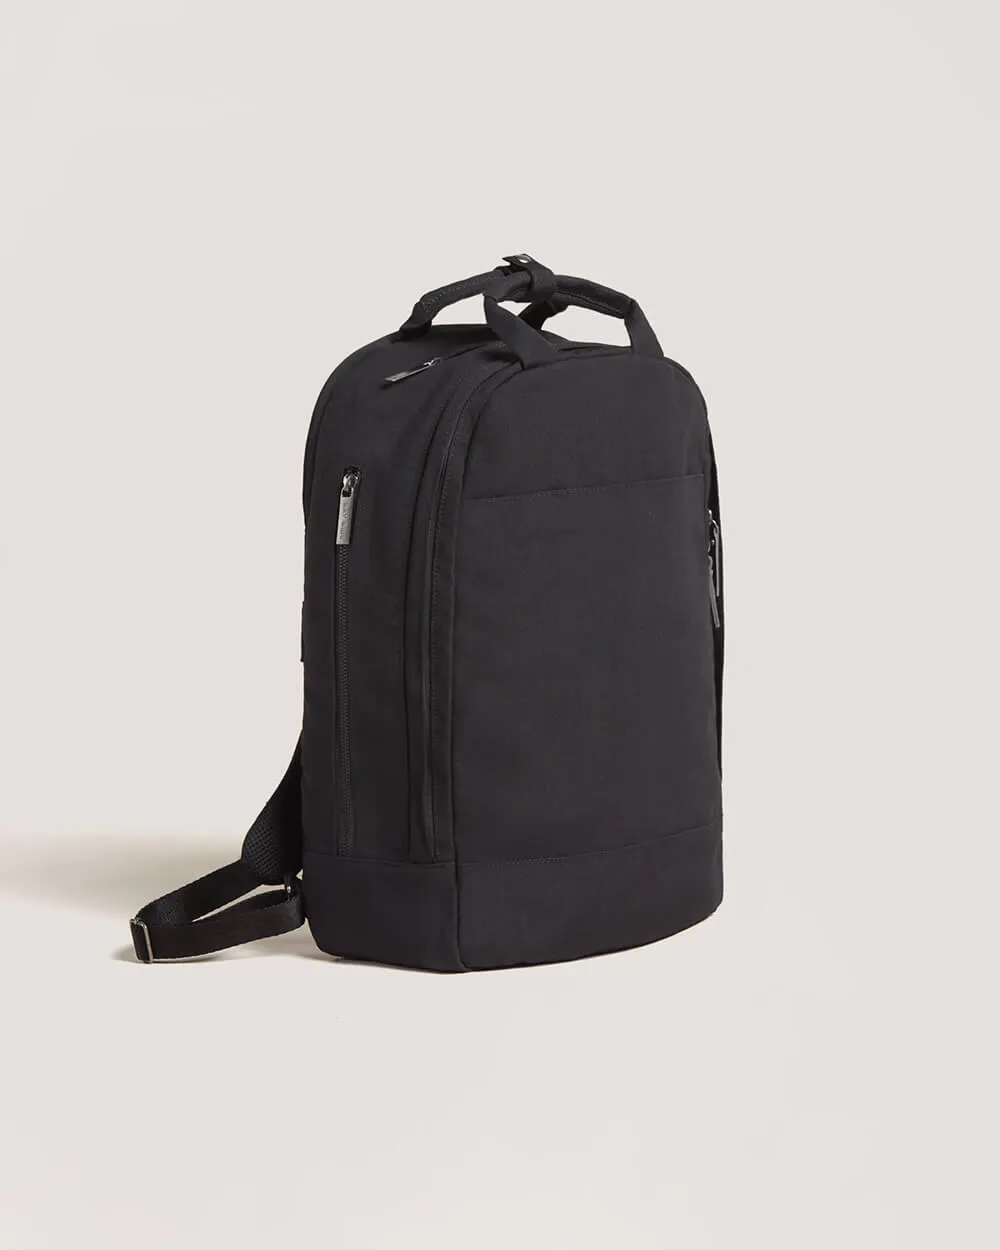 How a Good Laptop Backpack Can Enhance Your Travel Experience